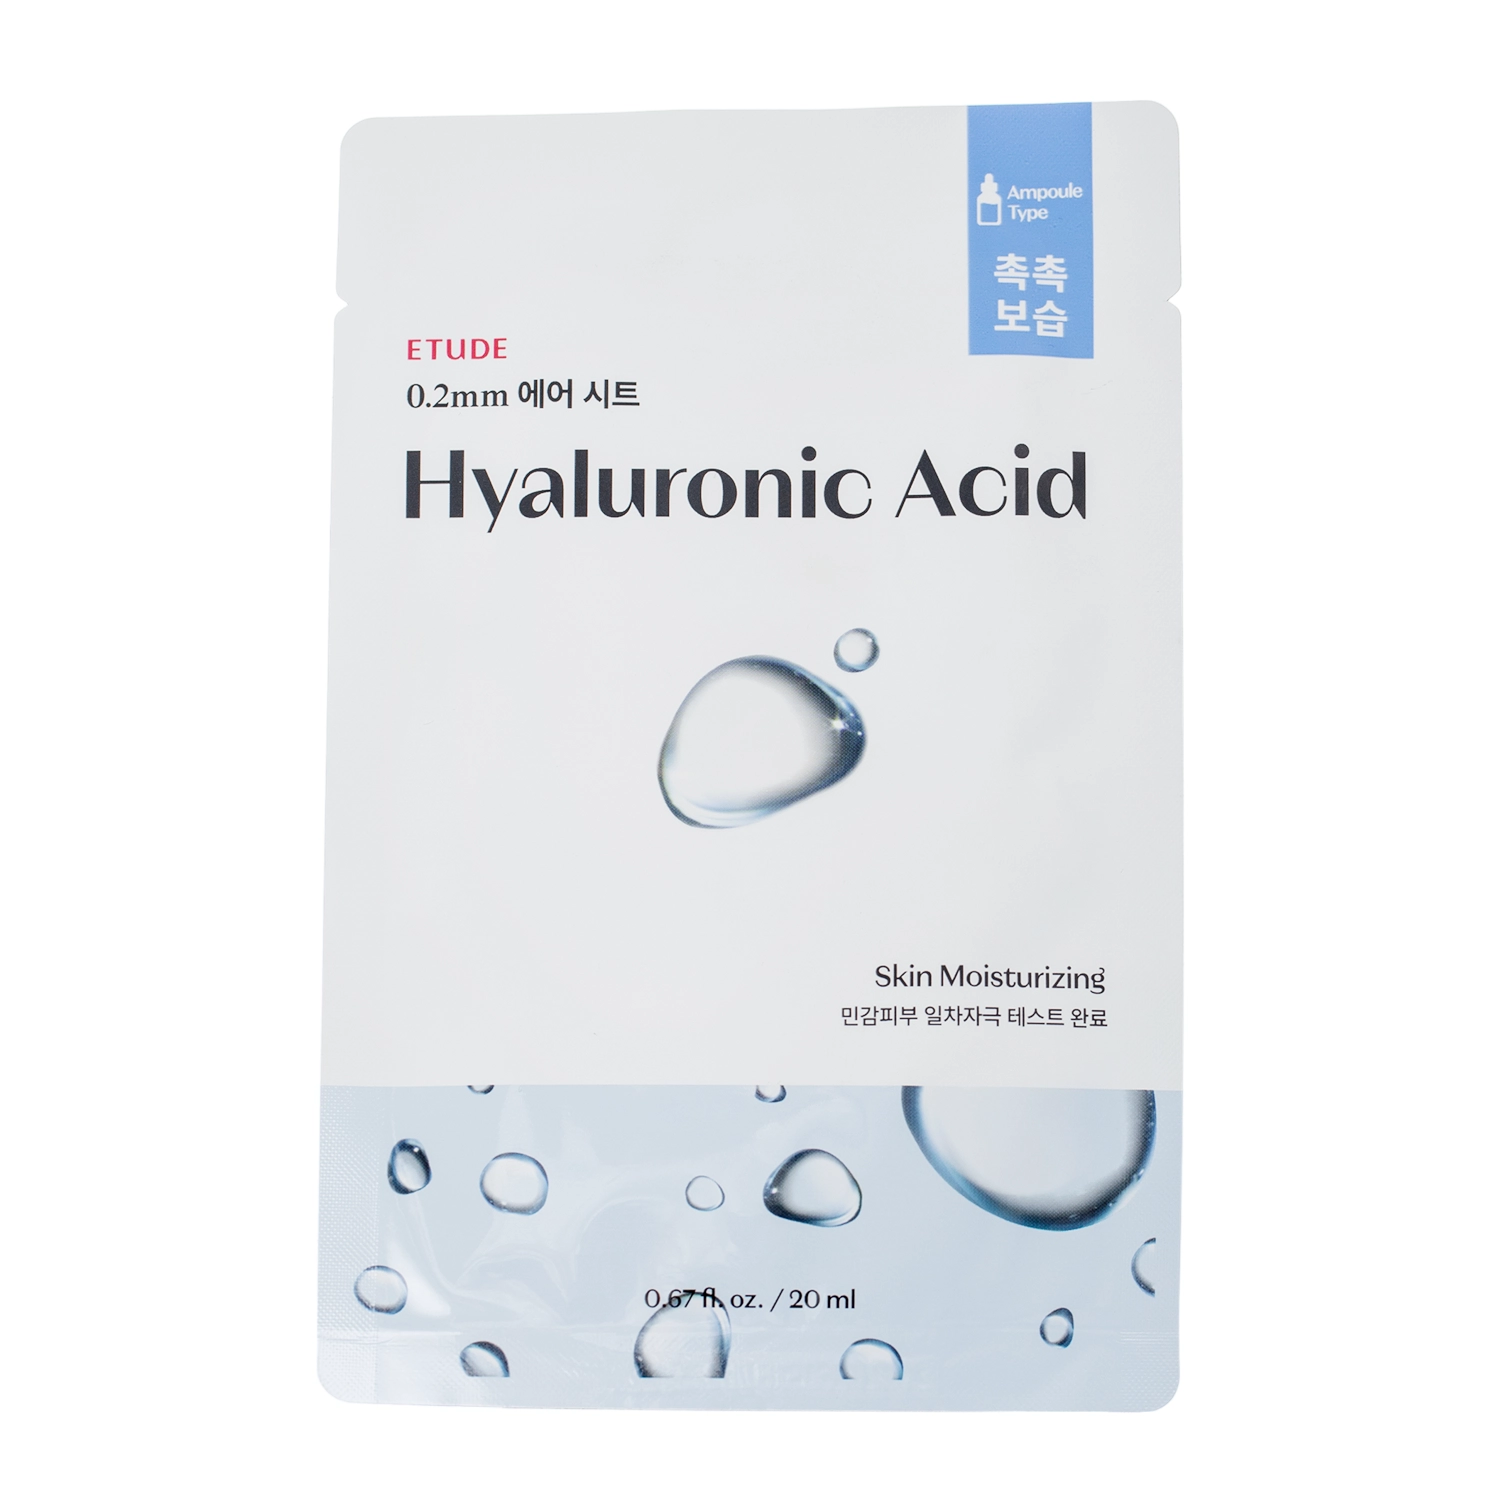 Etude House - 0.2mm Therapy Air Mask - Hyaluronic Acid - Feuchtigkeitsspendende Hyaluronsäure-Maske - 20ml